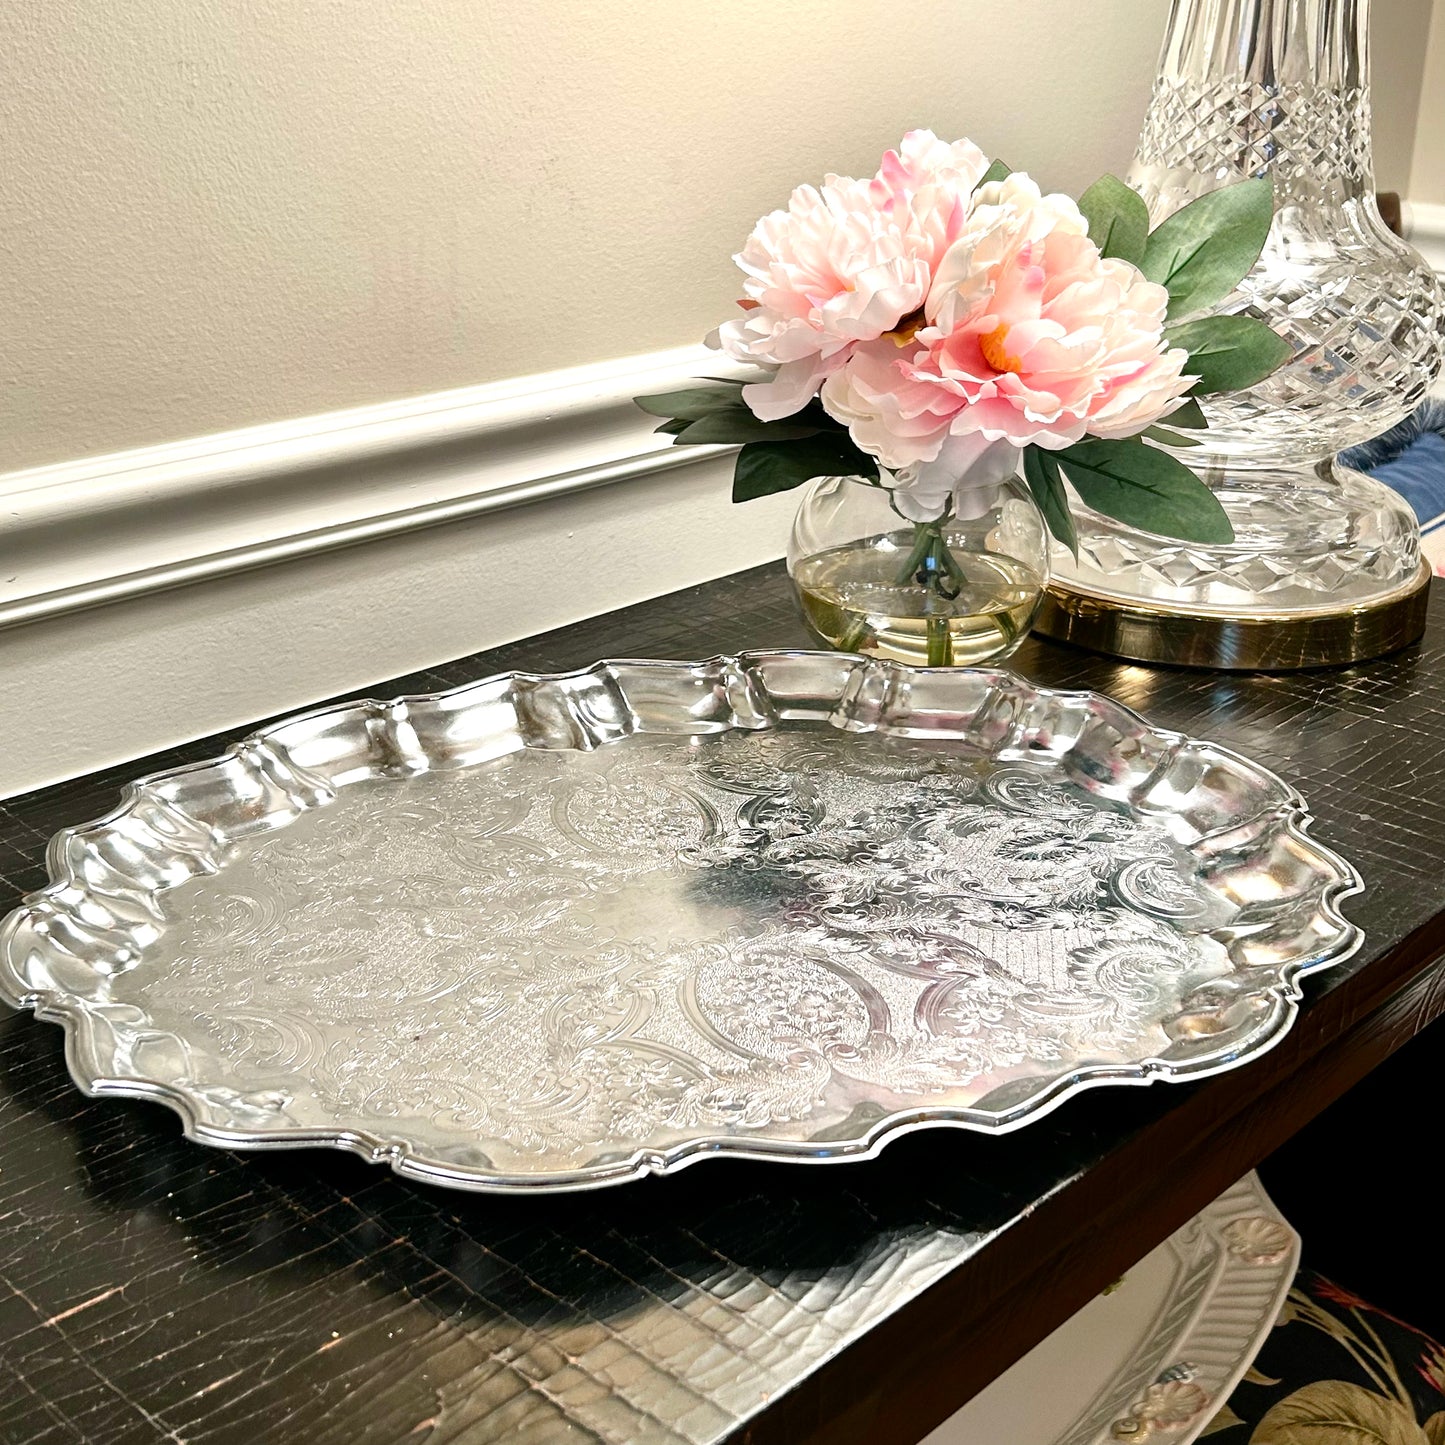 Sparkling vintage Silver plate scalloped baroque tray stamped by maker